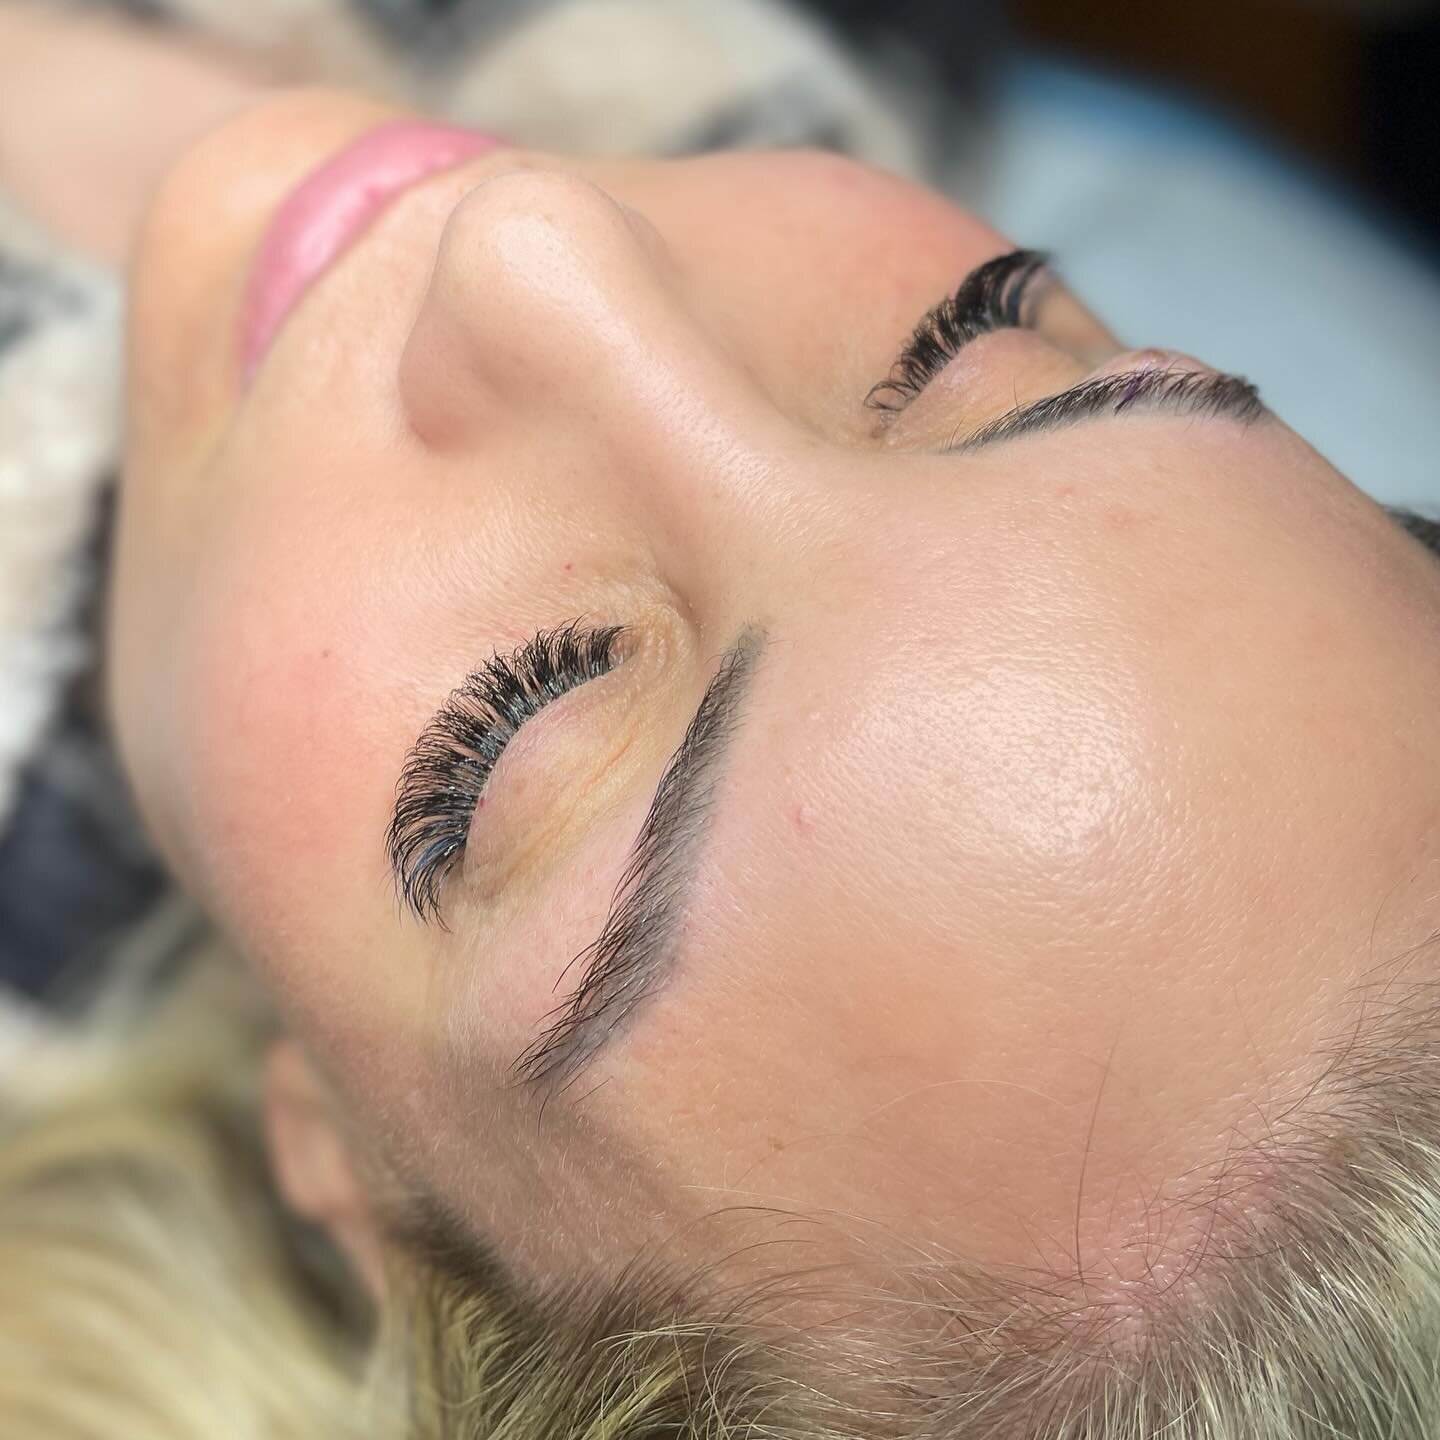 Lash Love 💕 This beauty told me today a girl at her work asked her what Mascara she uses thinking her lashes were natural (prior to this fill) because lashes can look really natural. Not all sets look super long and full like you see some crazy leng